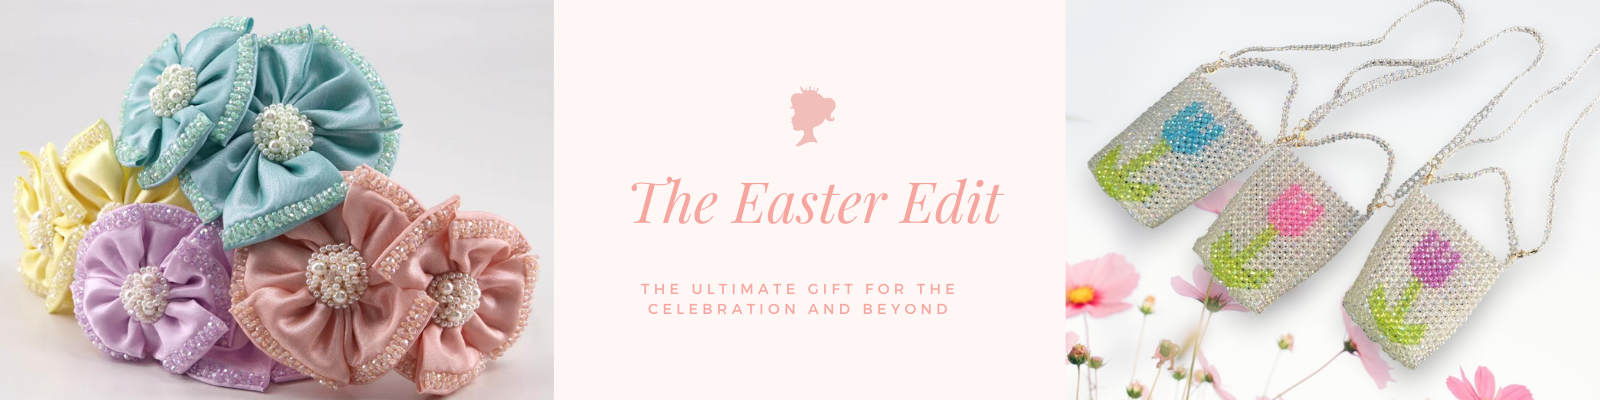 Best luxury childrens gifts for easter